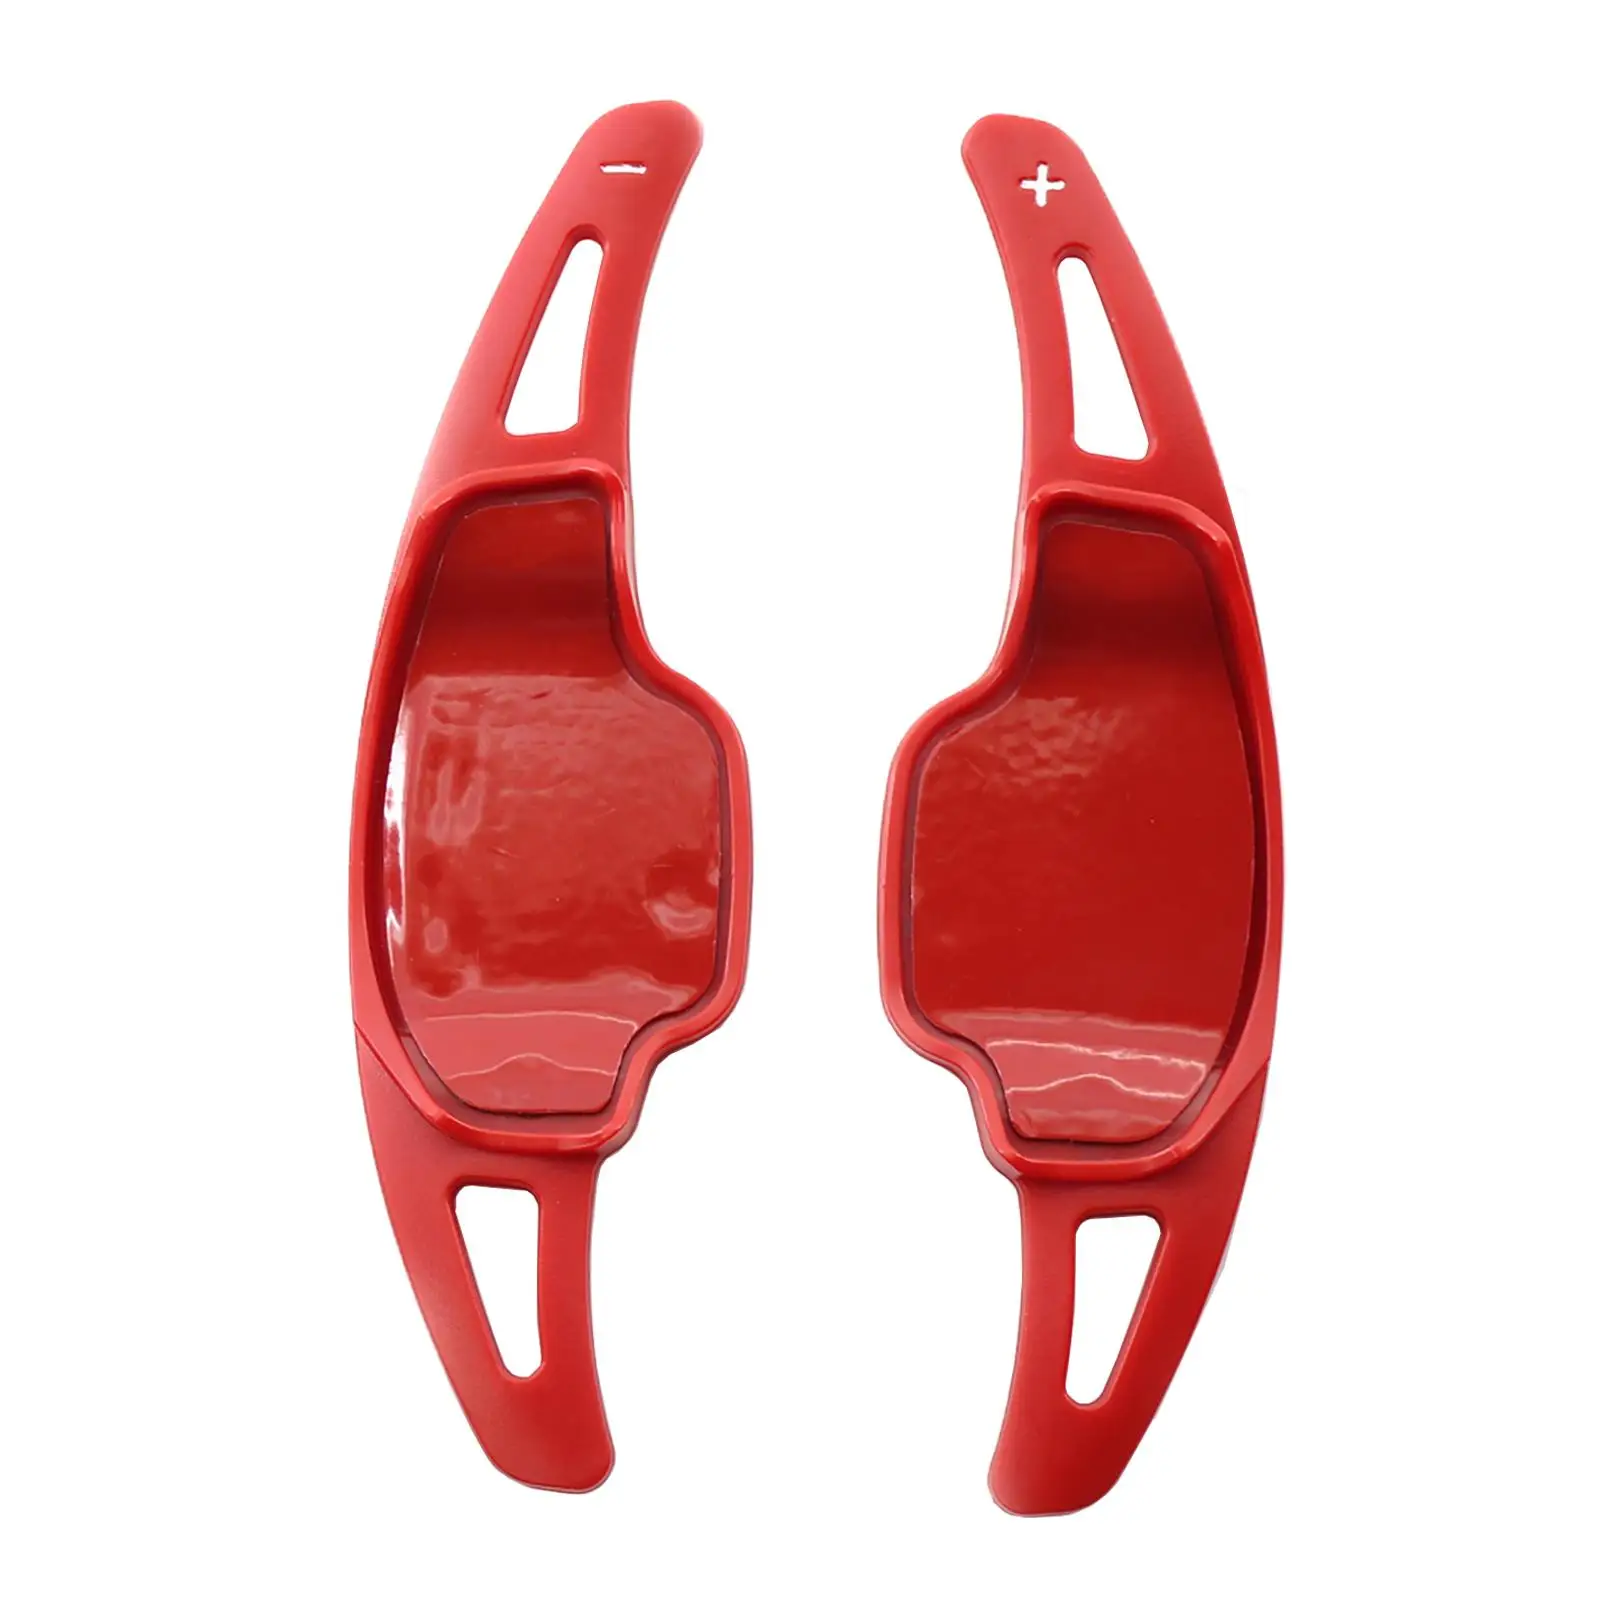 2x Automotive Steering Paddle Shifter Extension Cover Larger Red Plastic Paddle Blade Fit for Chevy Camaro 2012-2015